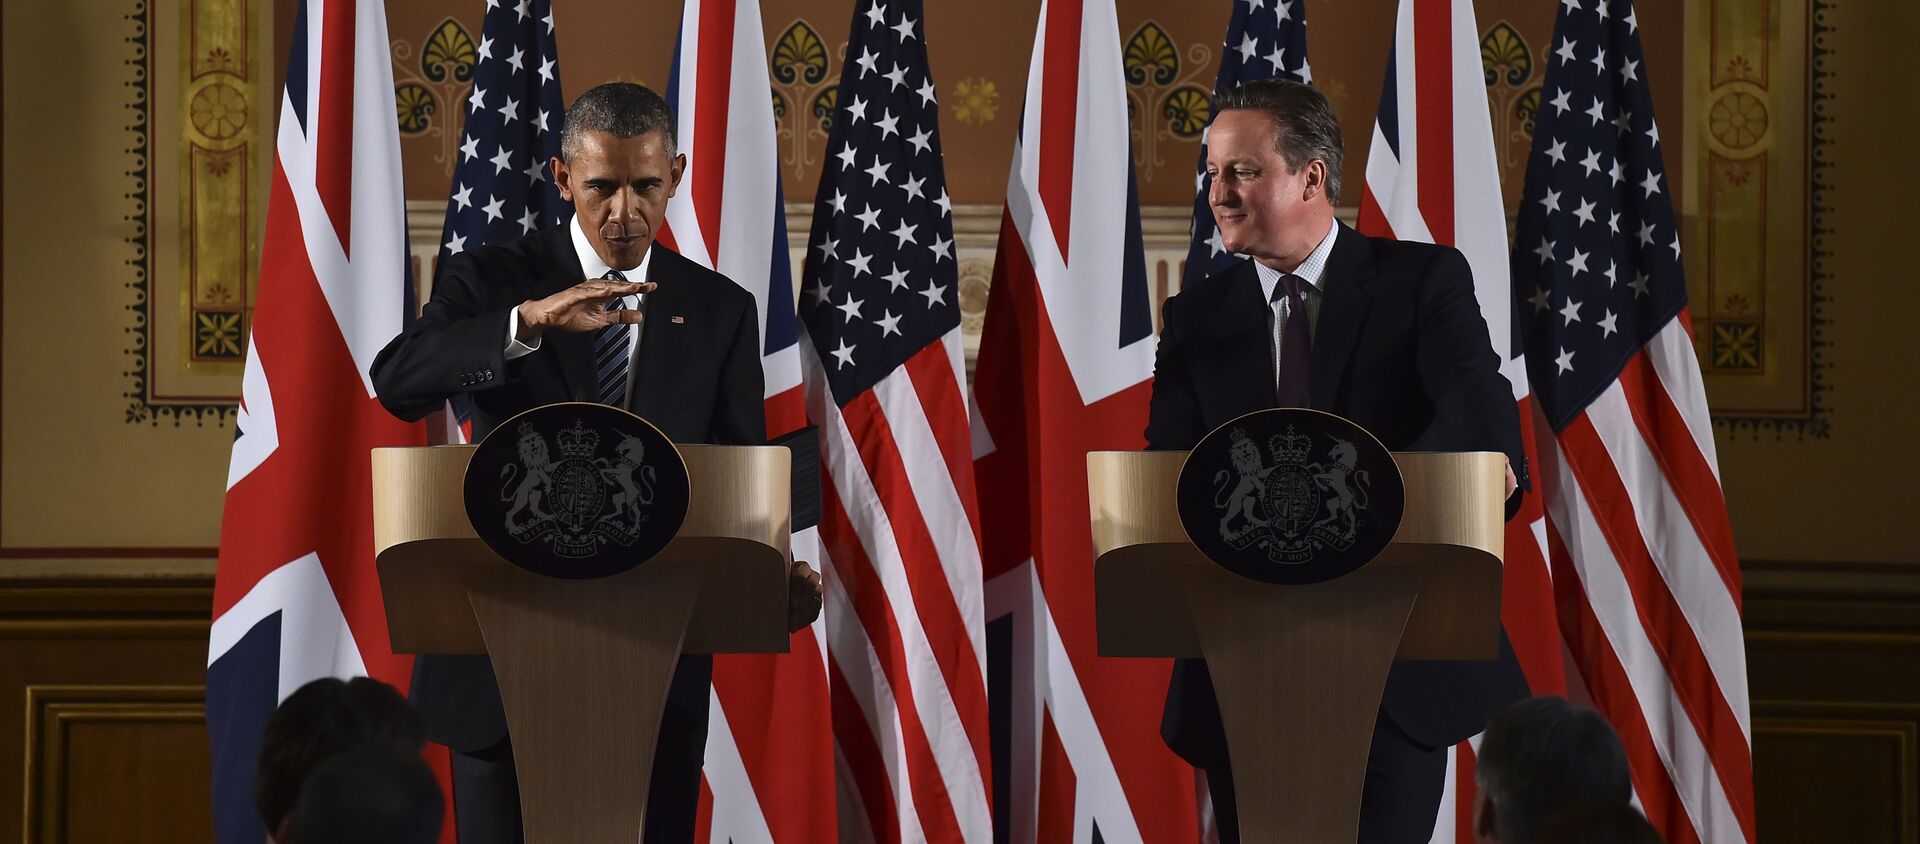 US President Barack Obama (L) talks during a press conference with then Britain's Prime Minister David Cameron (R) at the Foreign and Commonwealth Office in central London on 22 April 2016 following a meeting at Downing Street. - Sputnik International, 1920, 28.03.2021